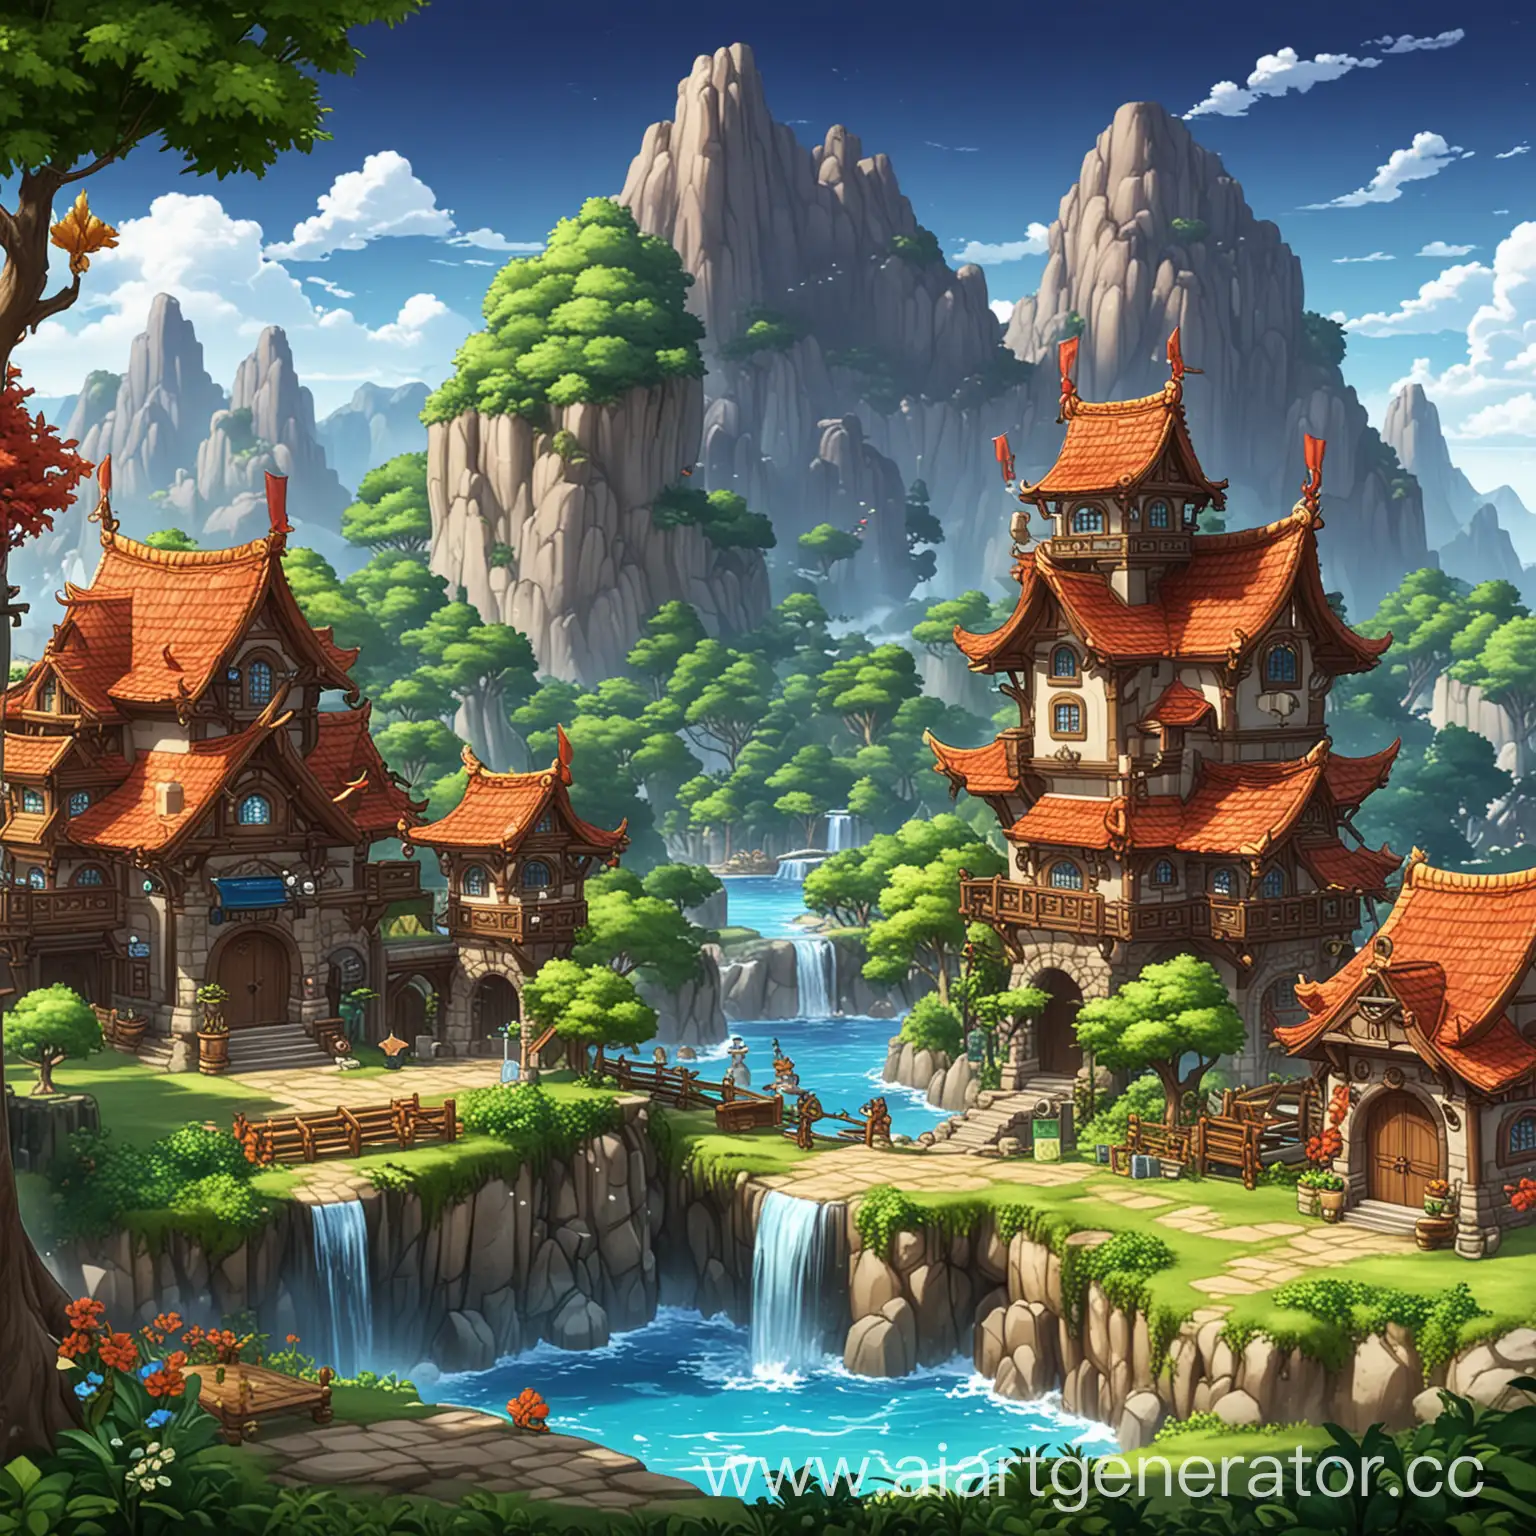 Enchanting-MapleStory-OL-Scenery-Explore-Vibrant-Landscapes-and-Iconic-Characters